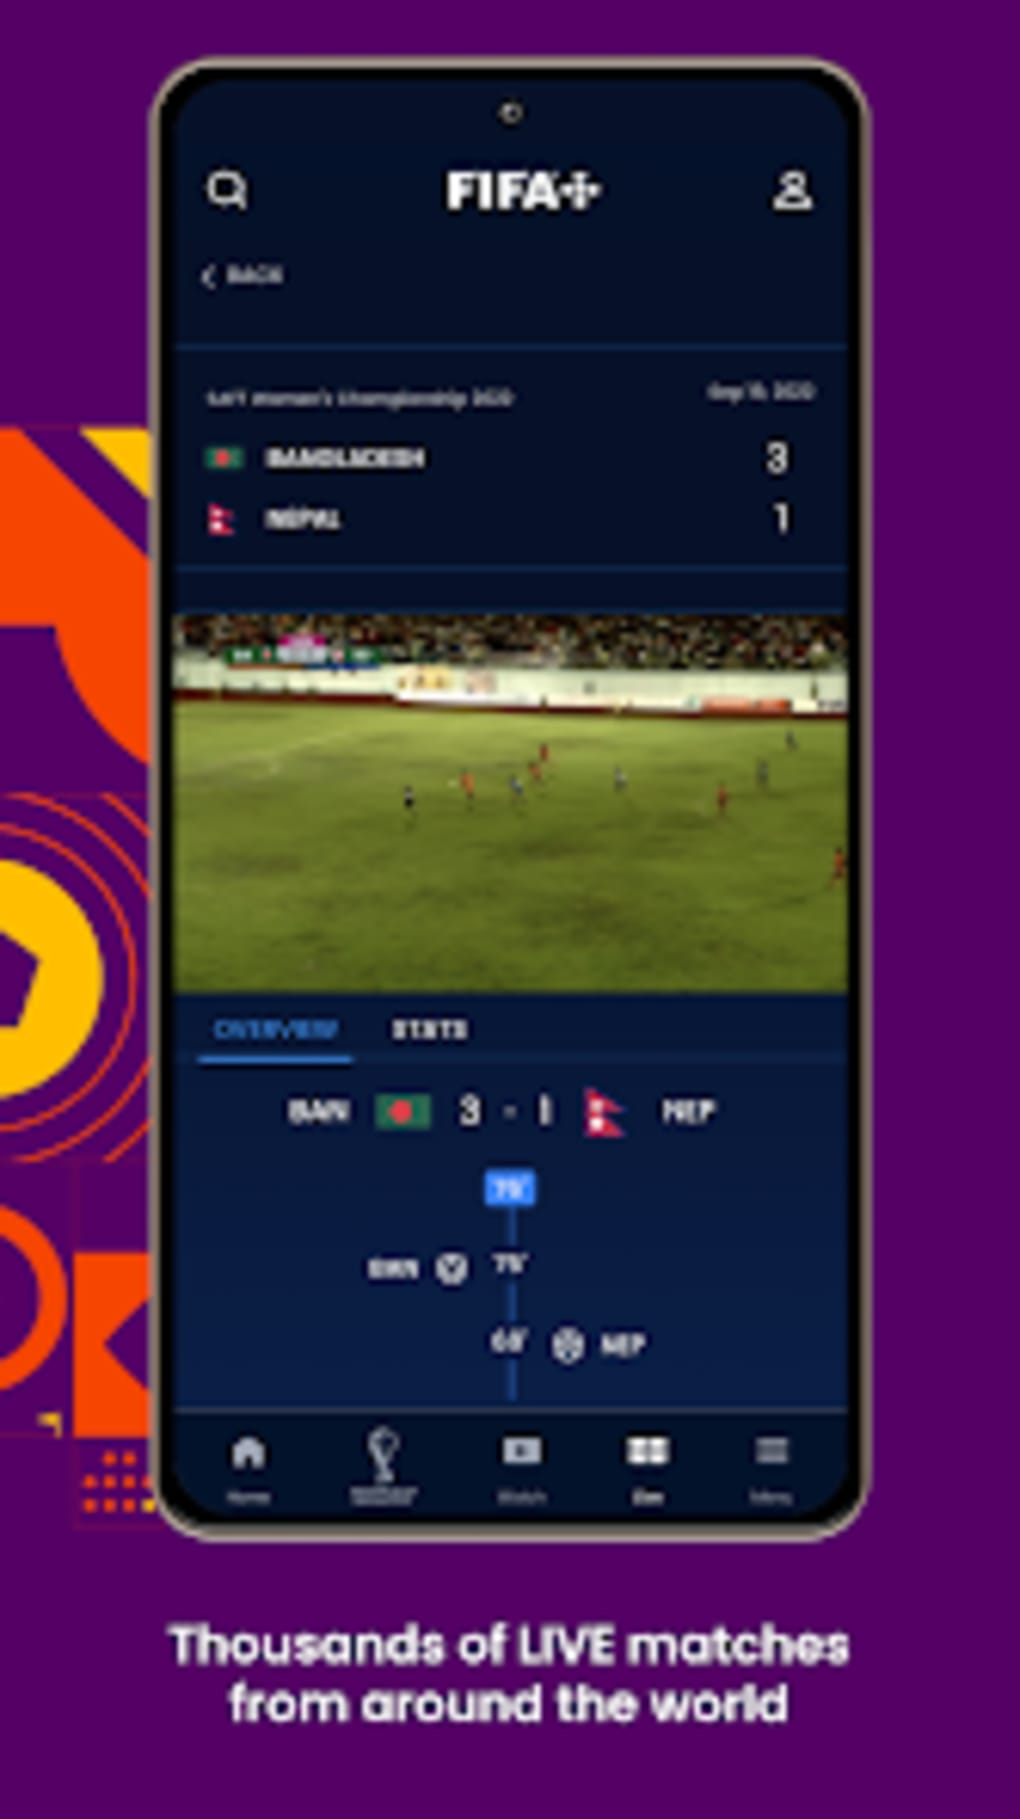 FIFA Plus for Android - Download